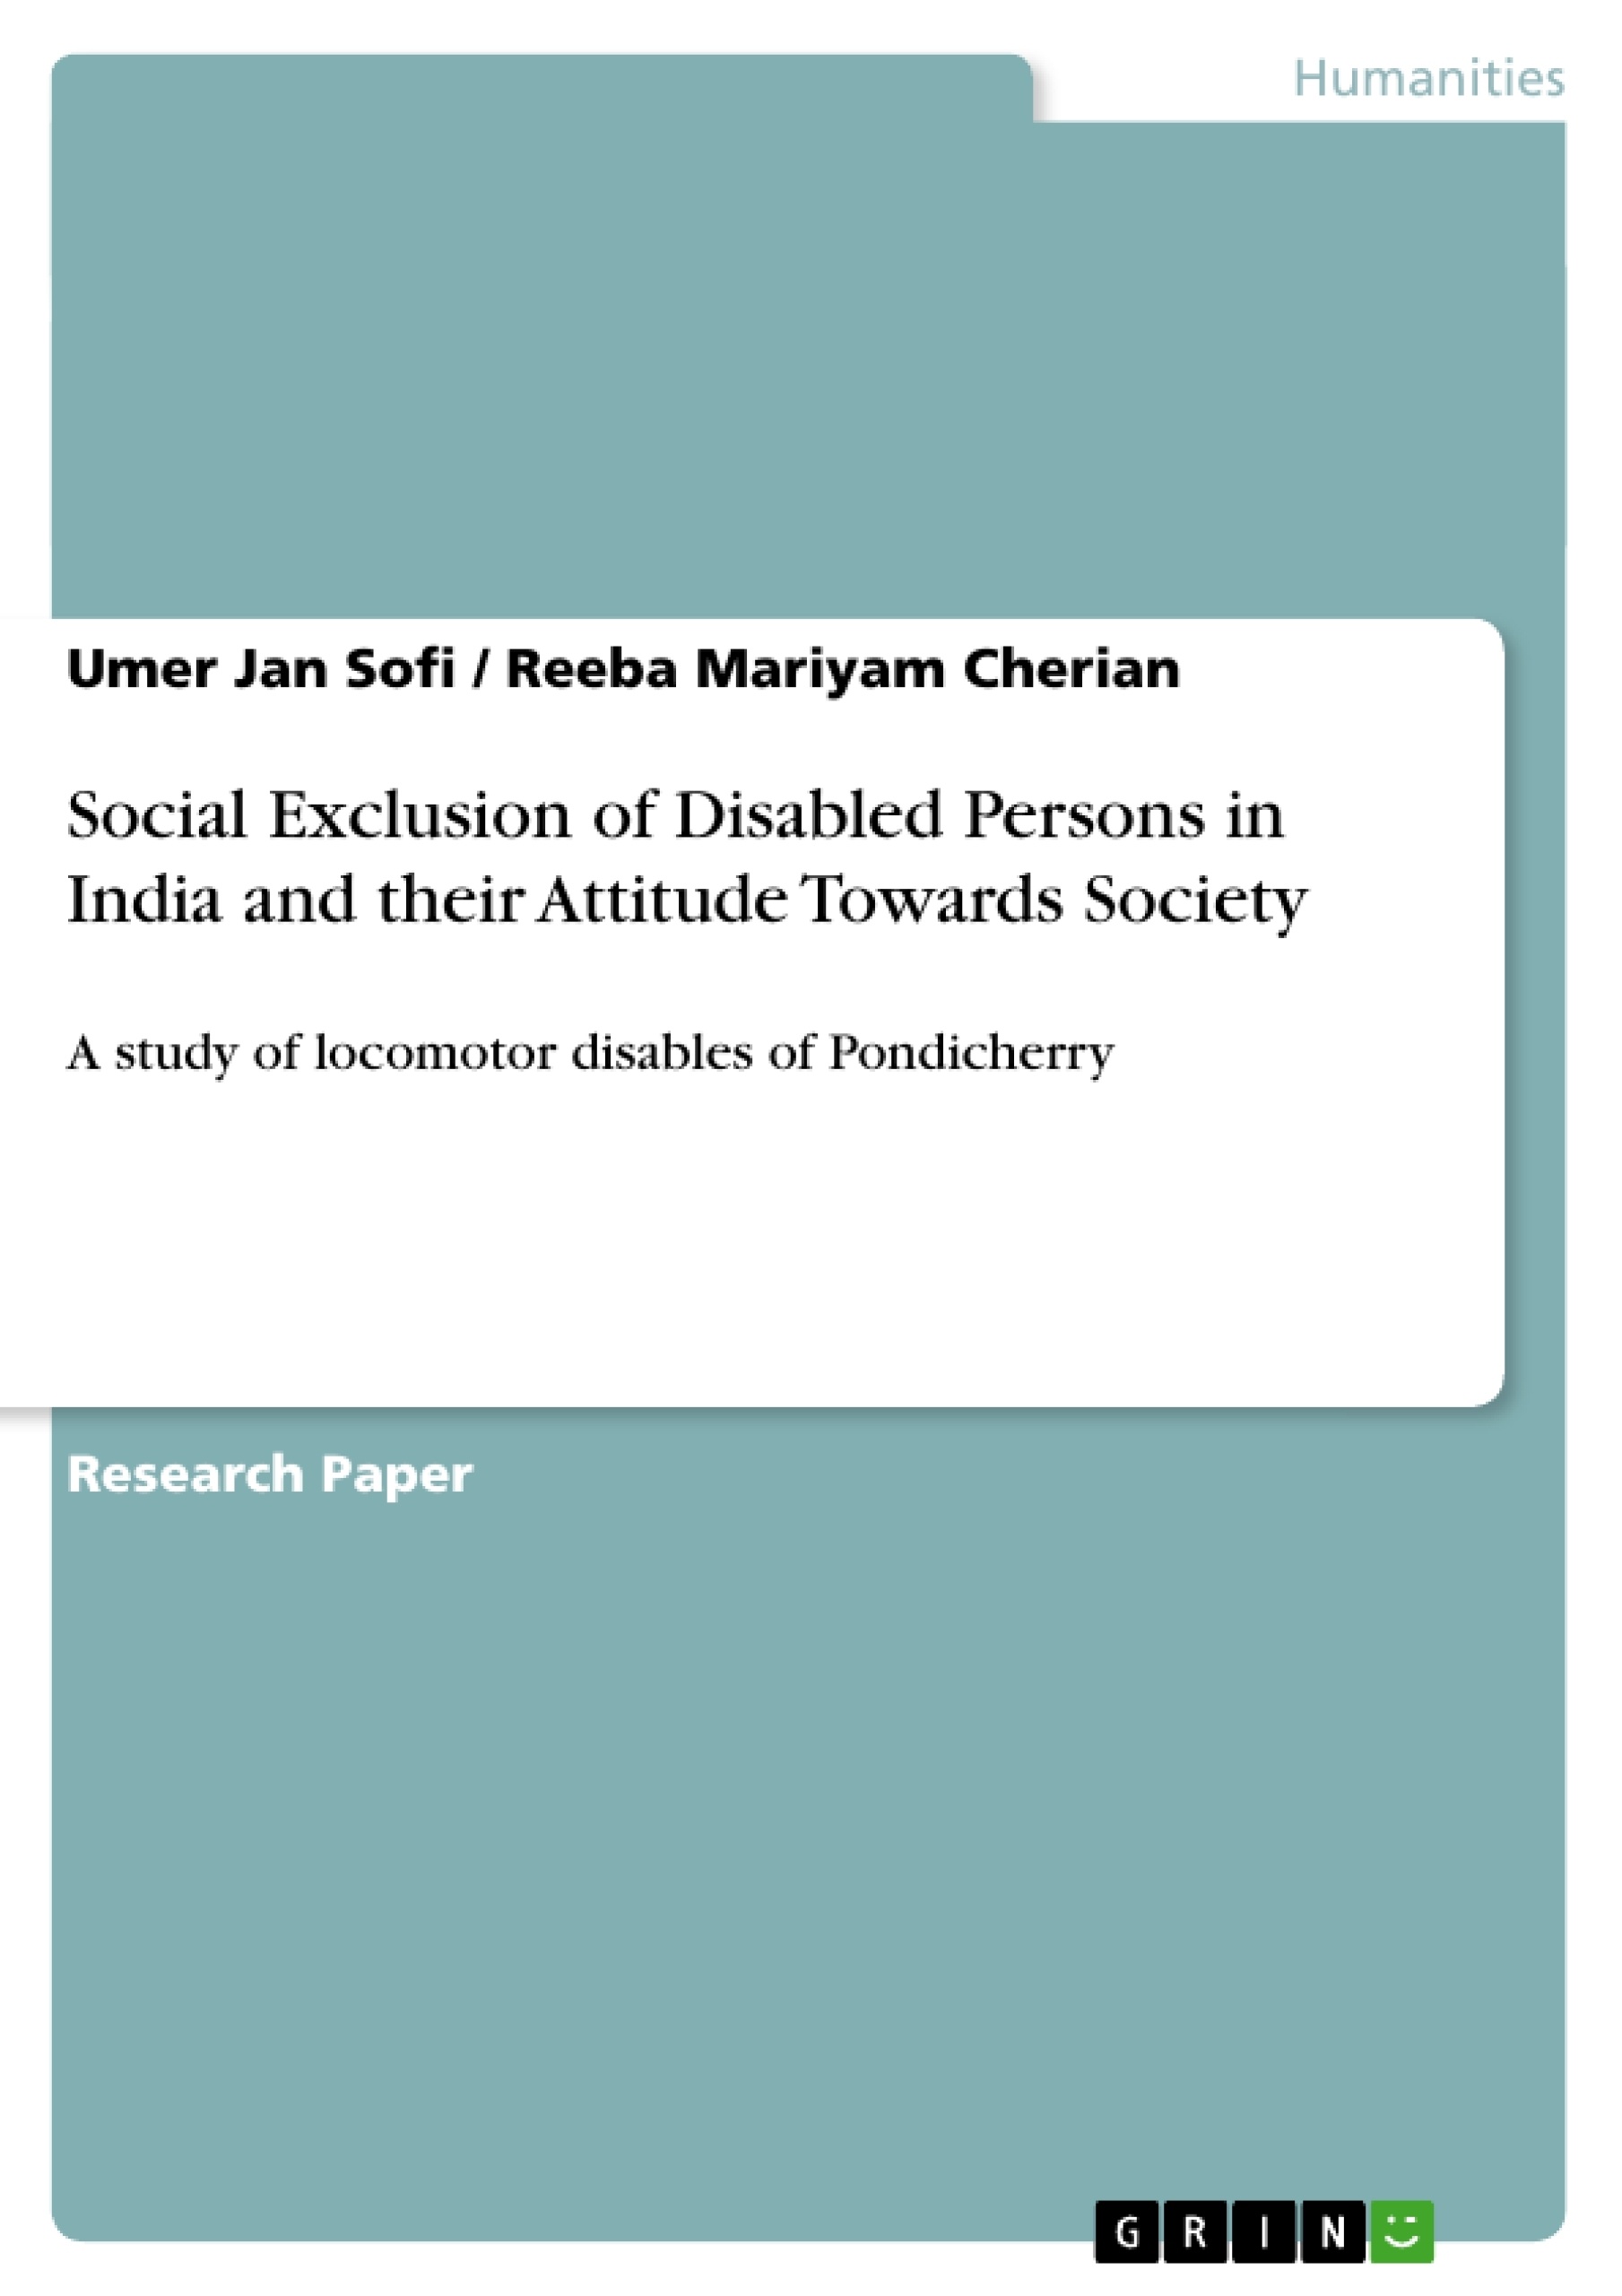 Title: Social Exclusion of Disabled Persons in India and their Attitude Towards Society